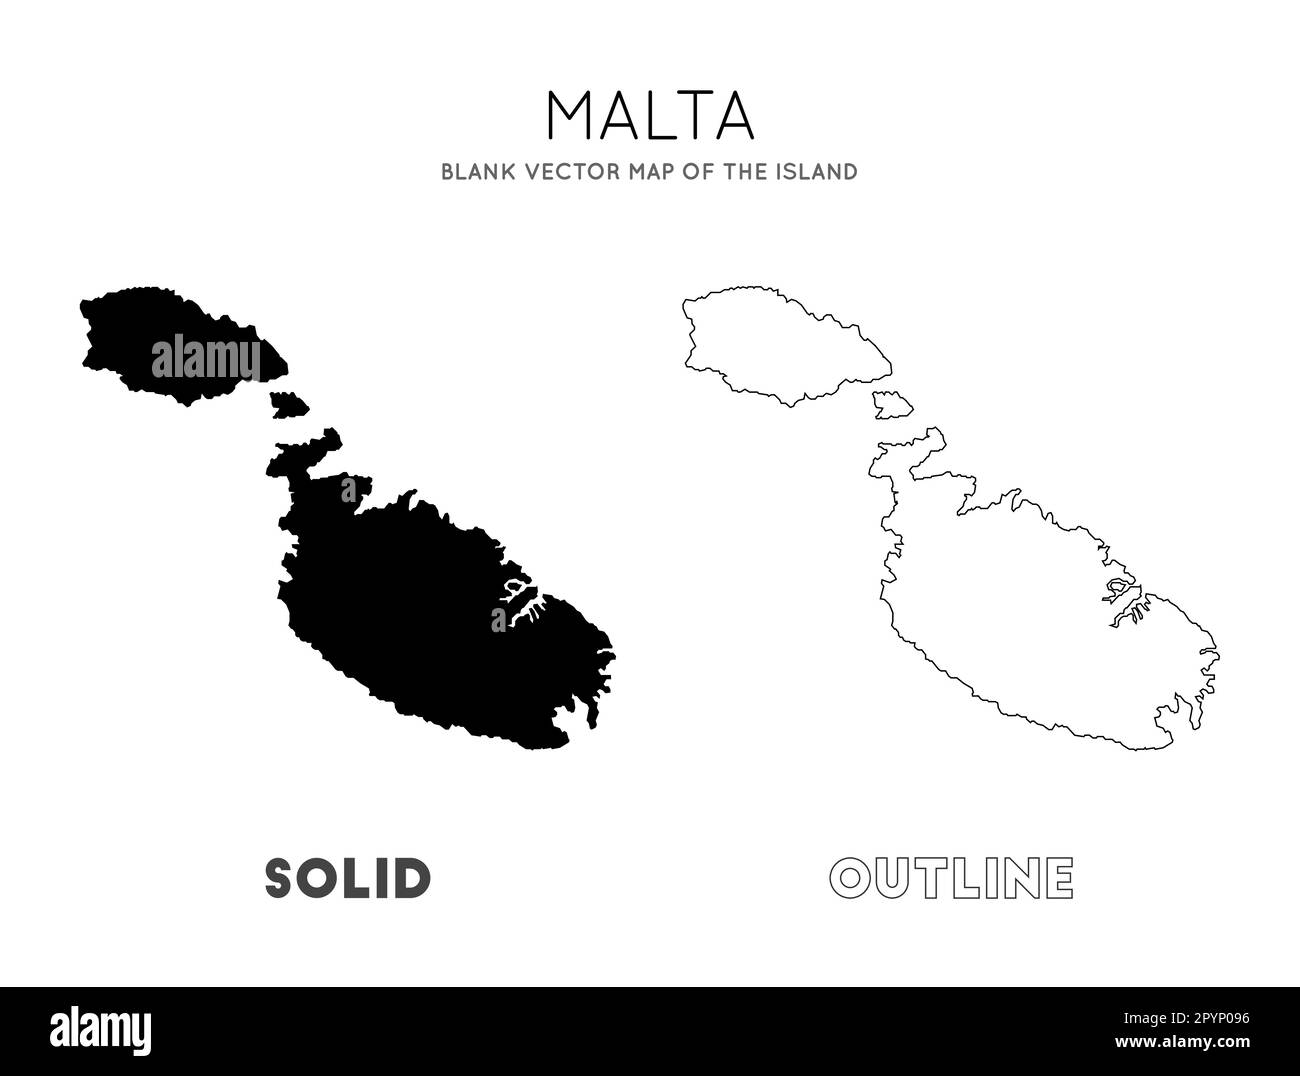 Malta map. Blank vector map of the Island. Borders of Malta for your infographic. Vector illustration. Stock Vector